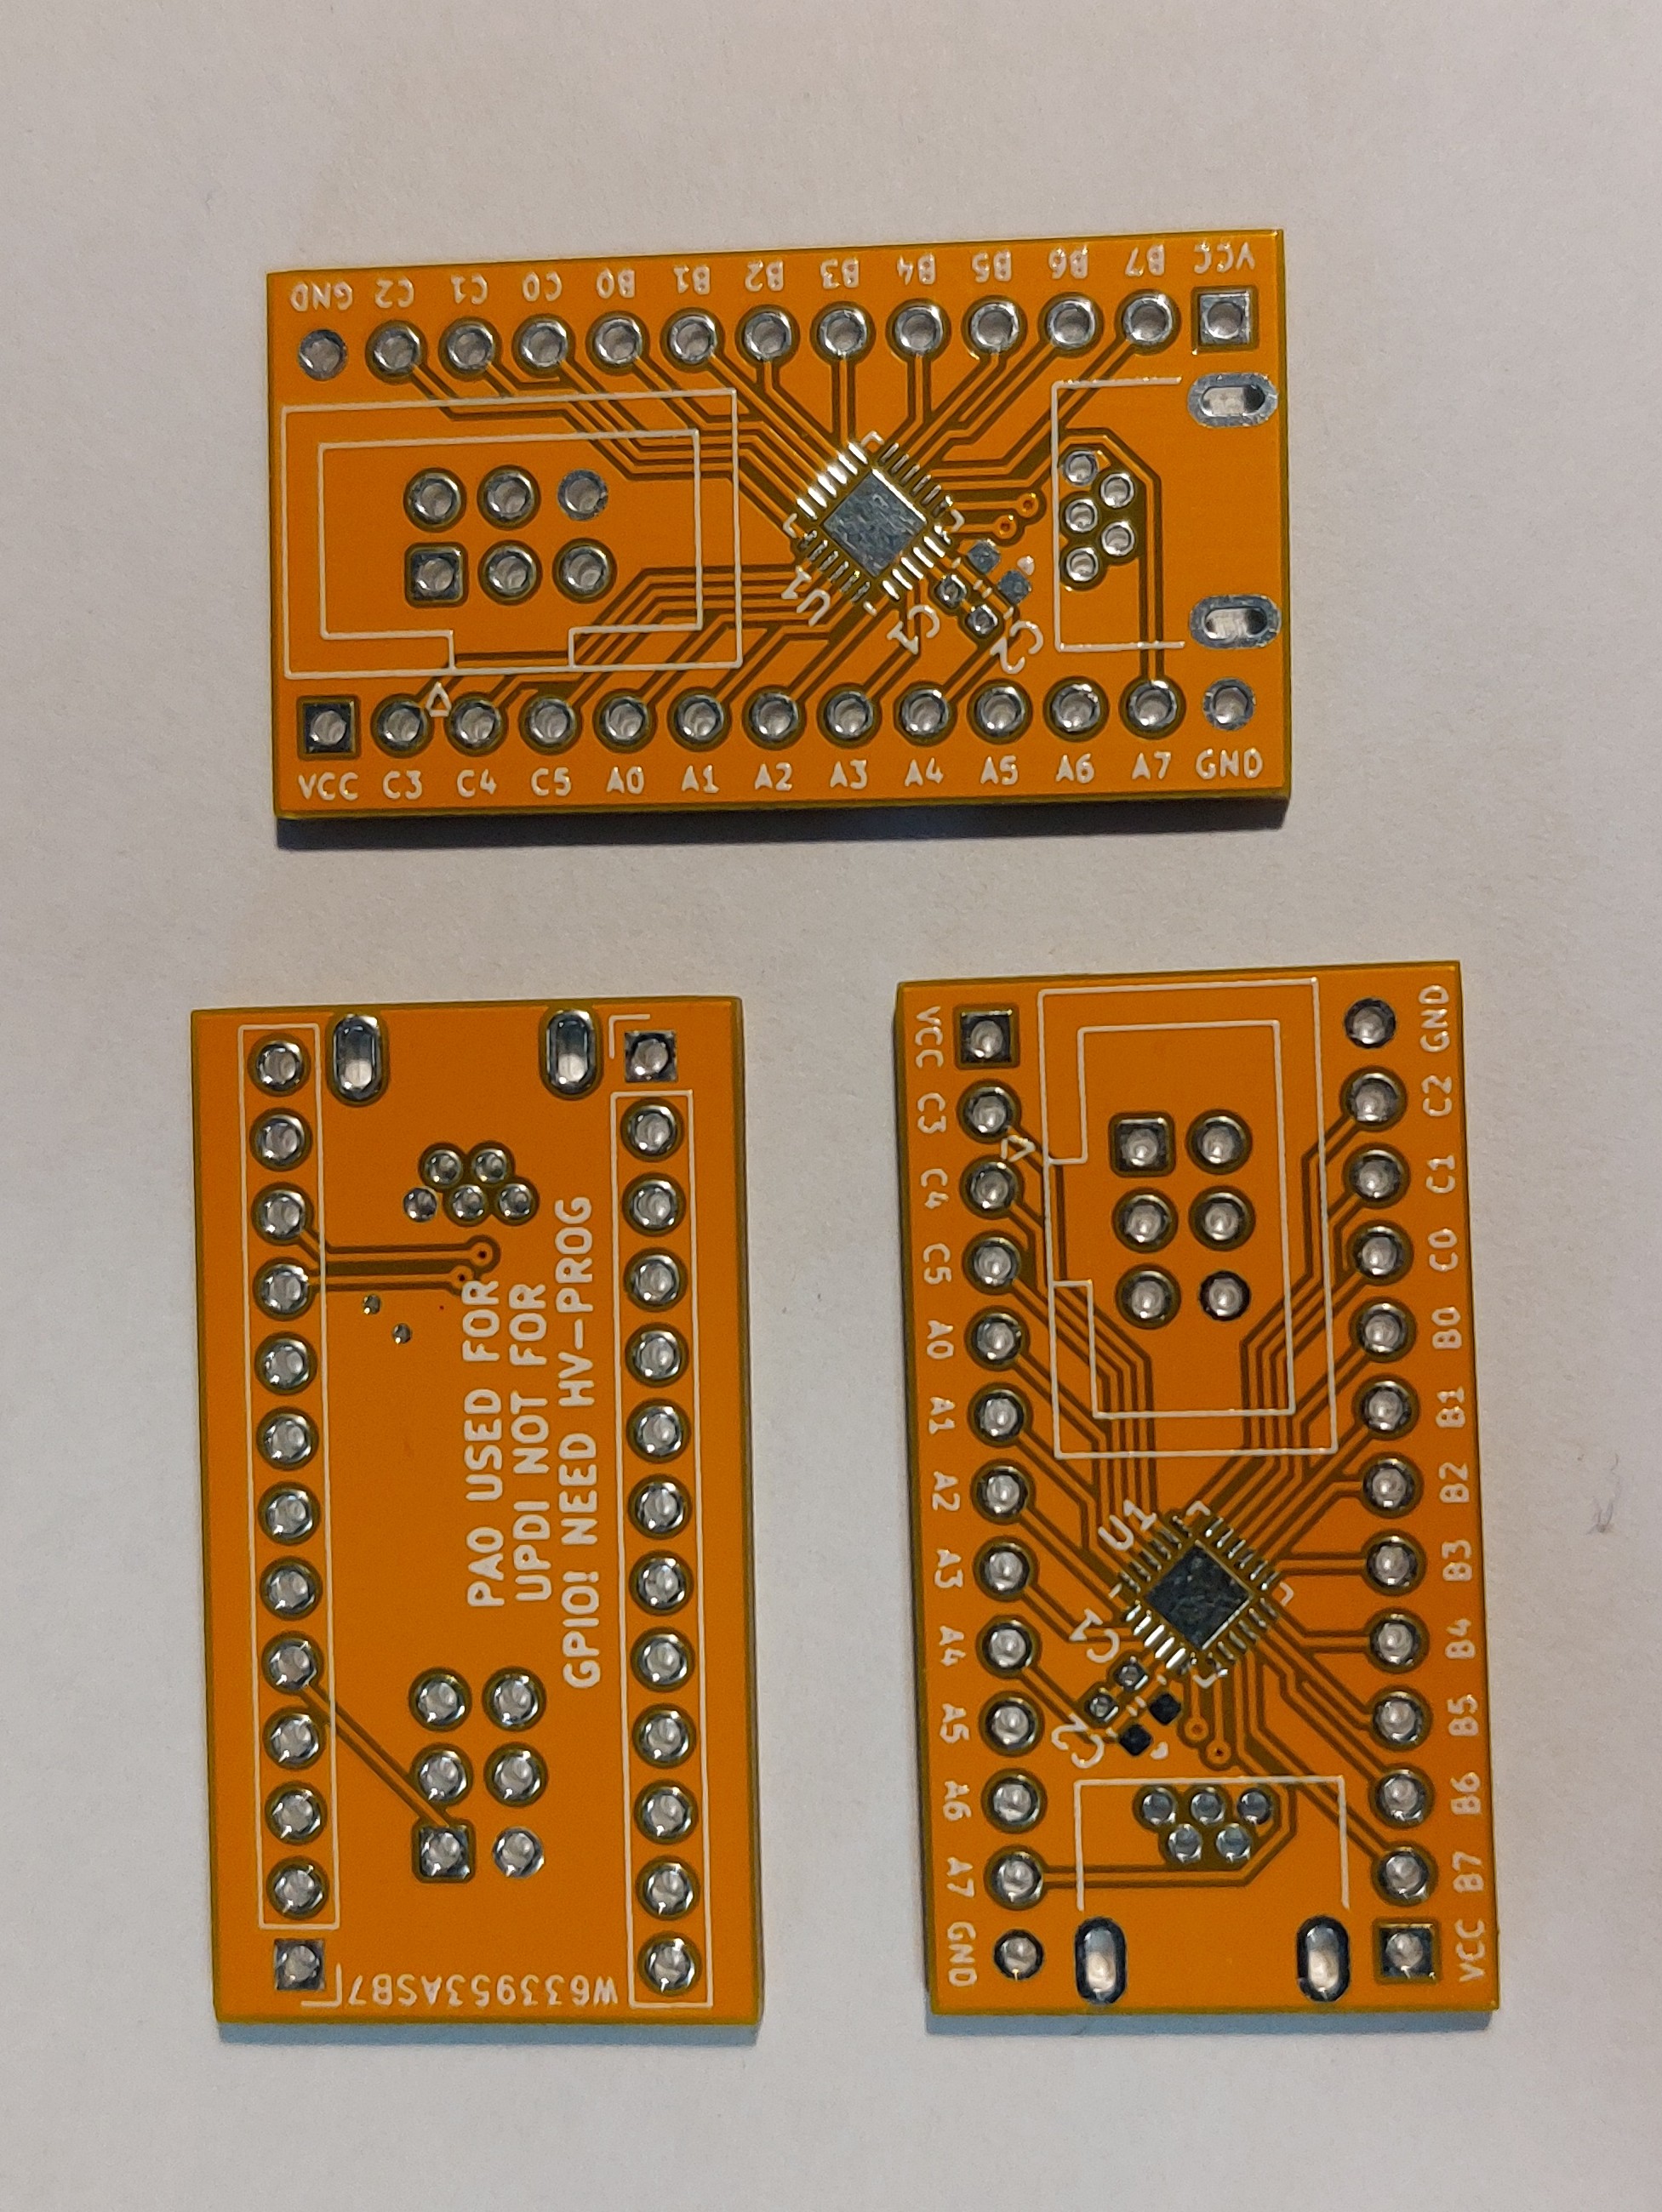 Boards from PCBWay